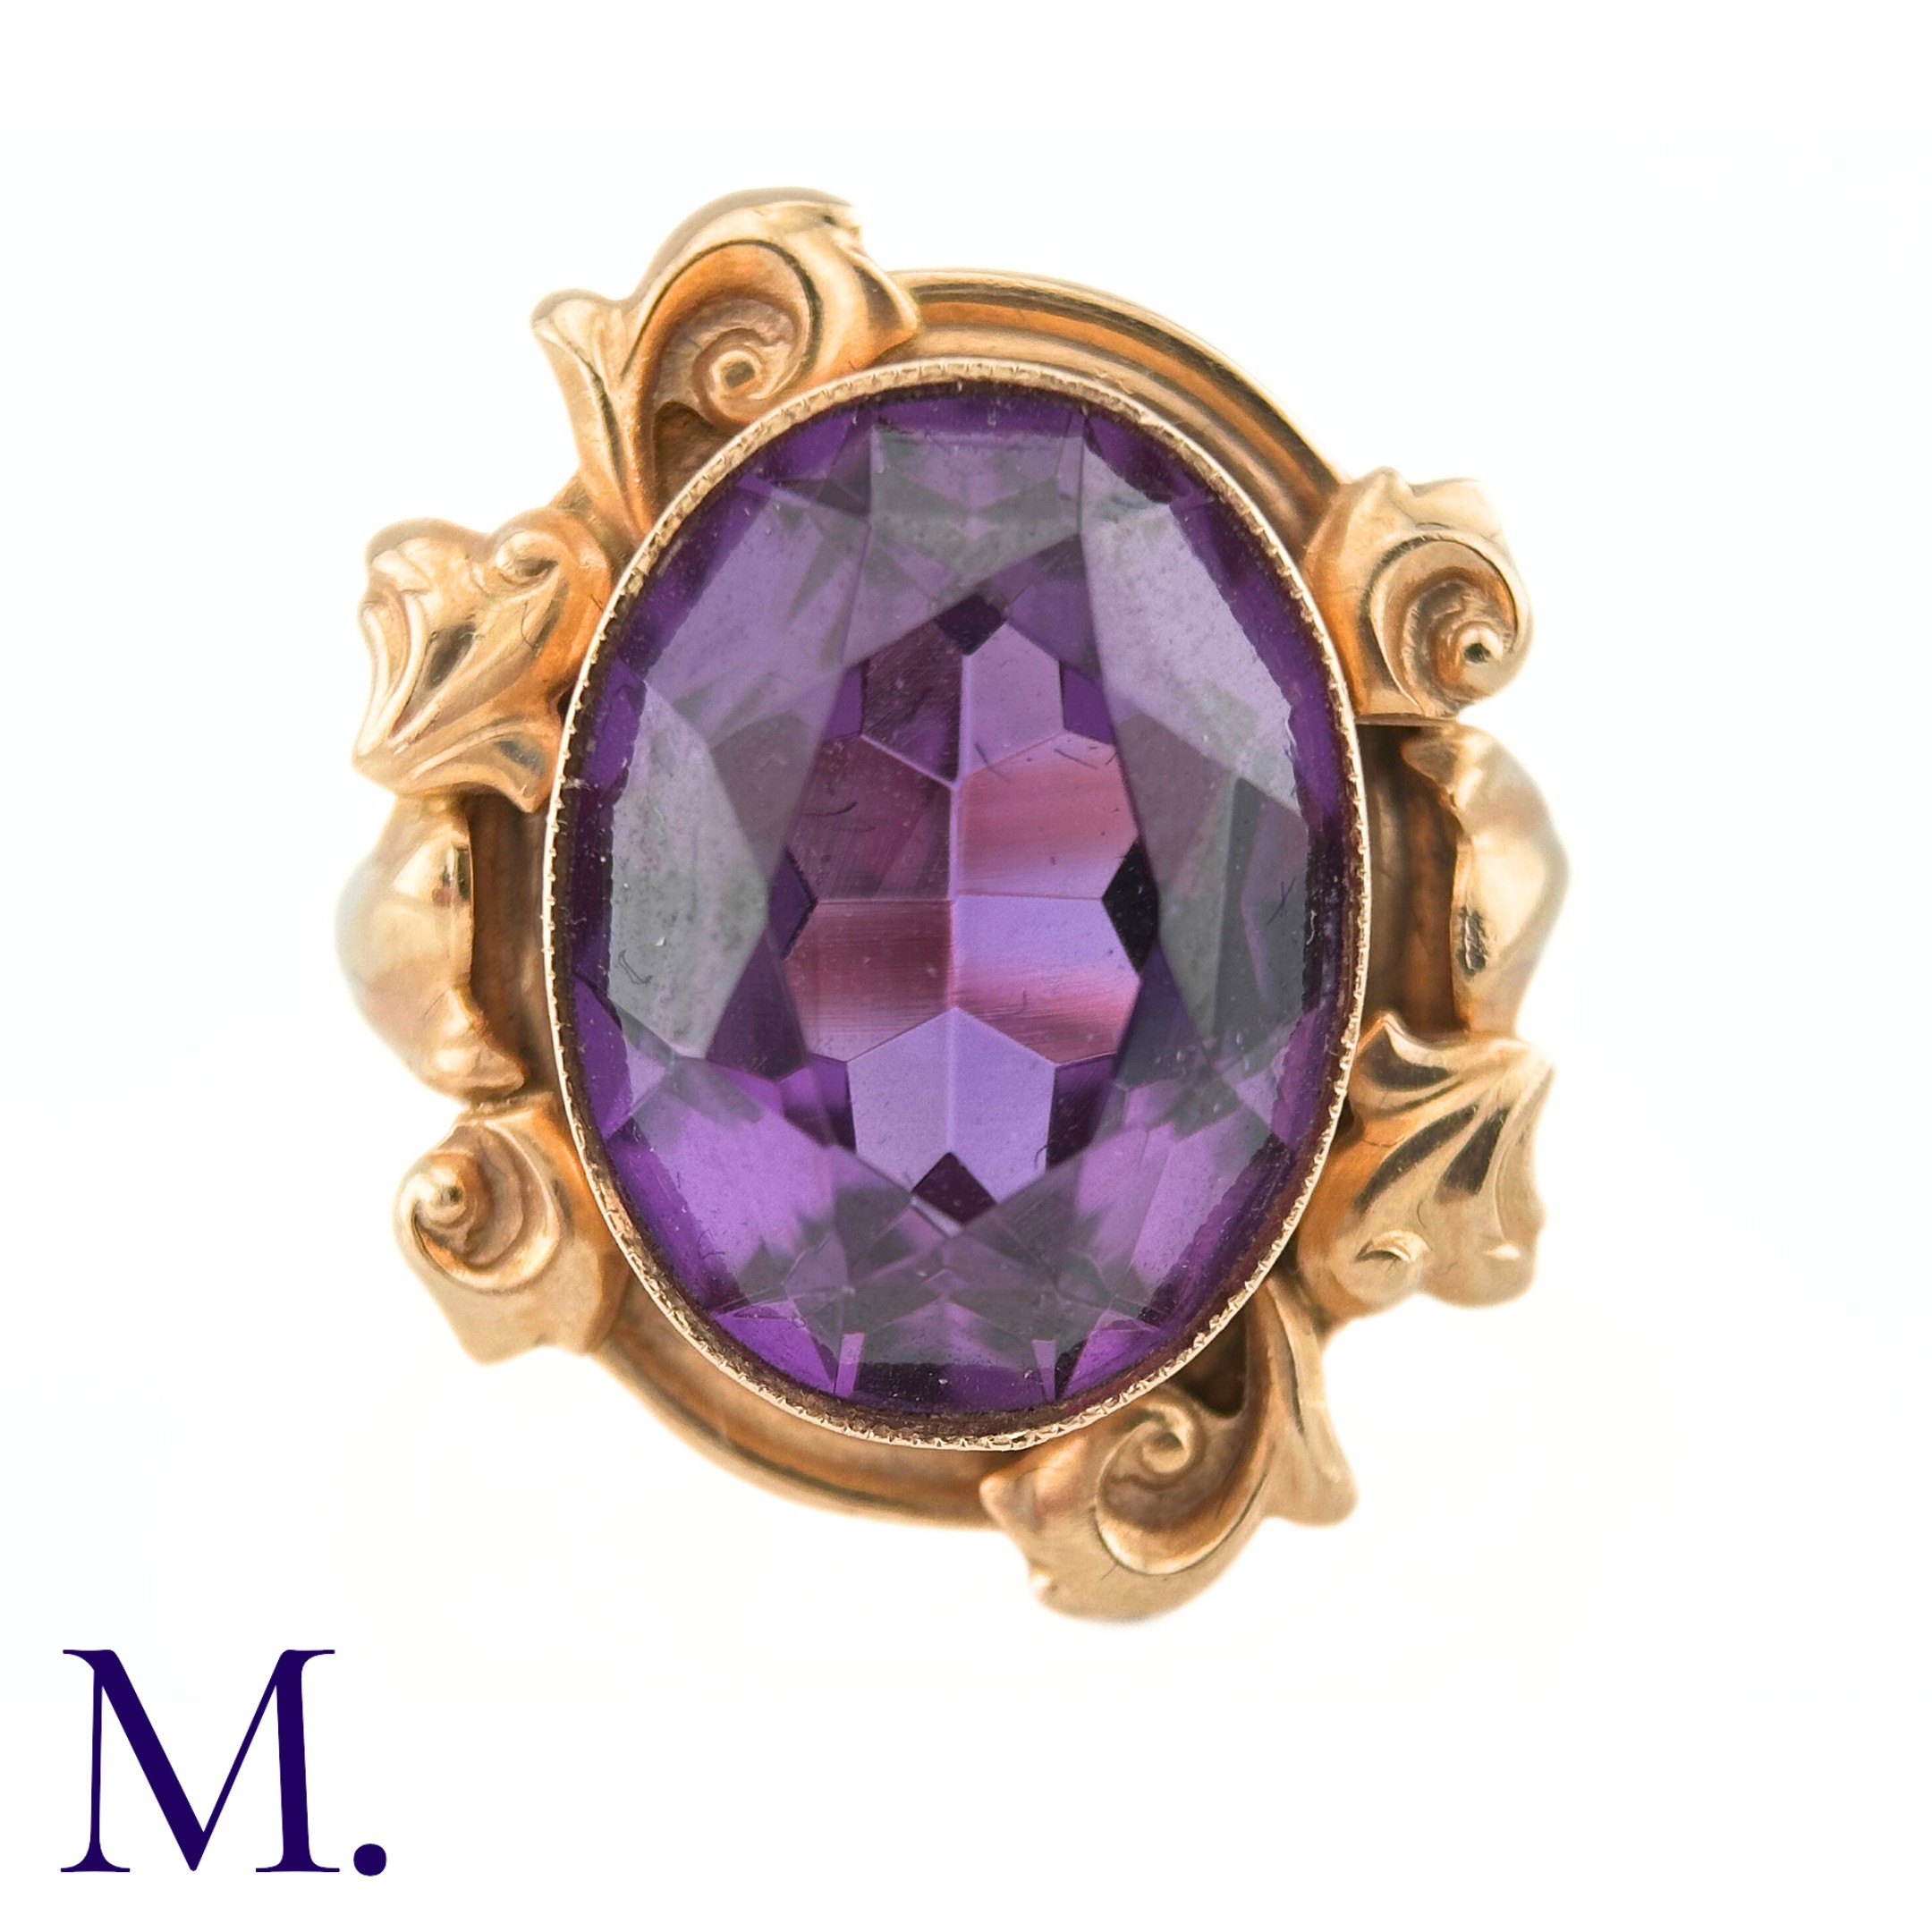 A Russian Purple Sapphire Ring The 14ct rose gold ring, with Russian hallmarks, is set with a